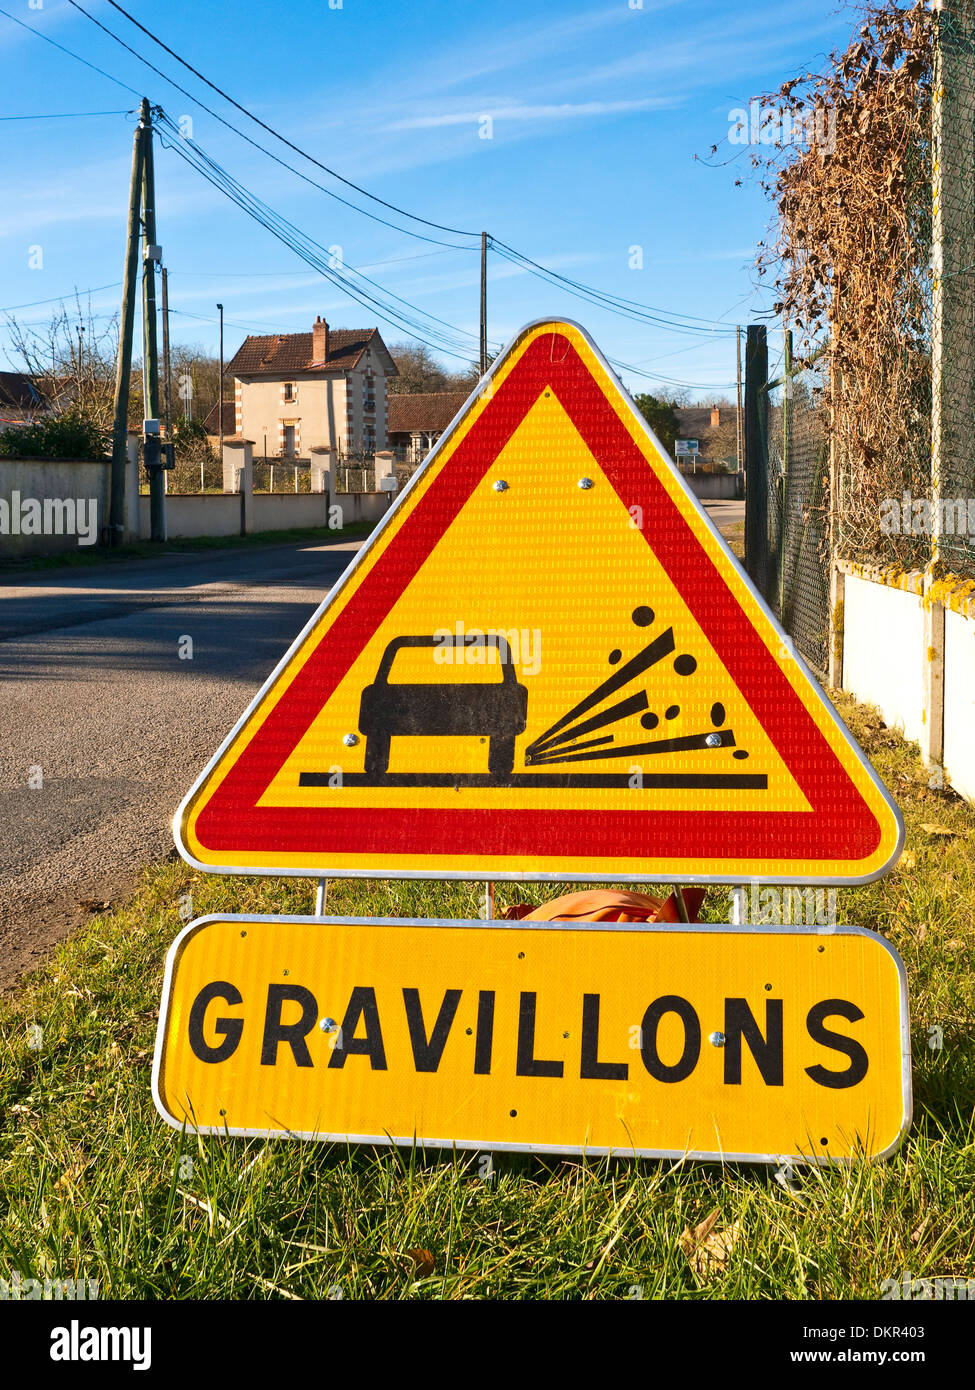 French Traffic Sign High Resolution Stock Photography and Images 